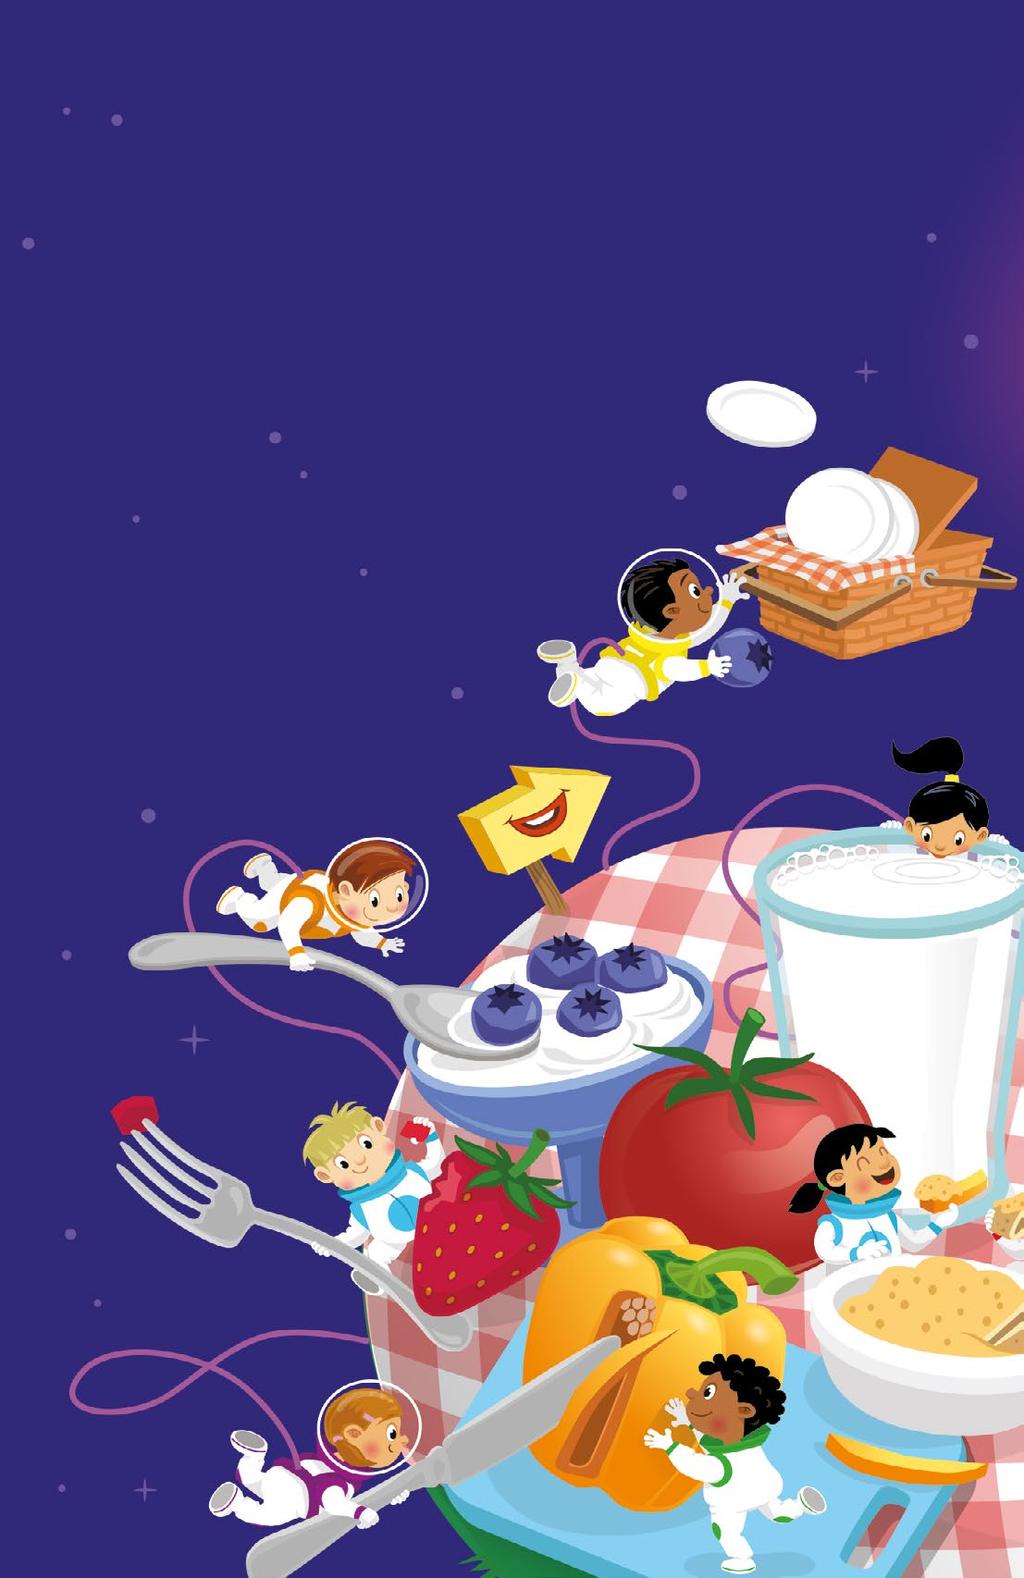 Food Mission : Conquer the Galaxy of the 5 Senses Stories, cooking activities, a nursery rhyme and other